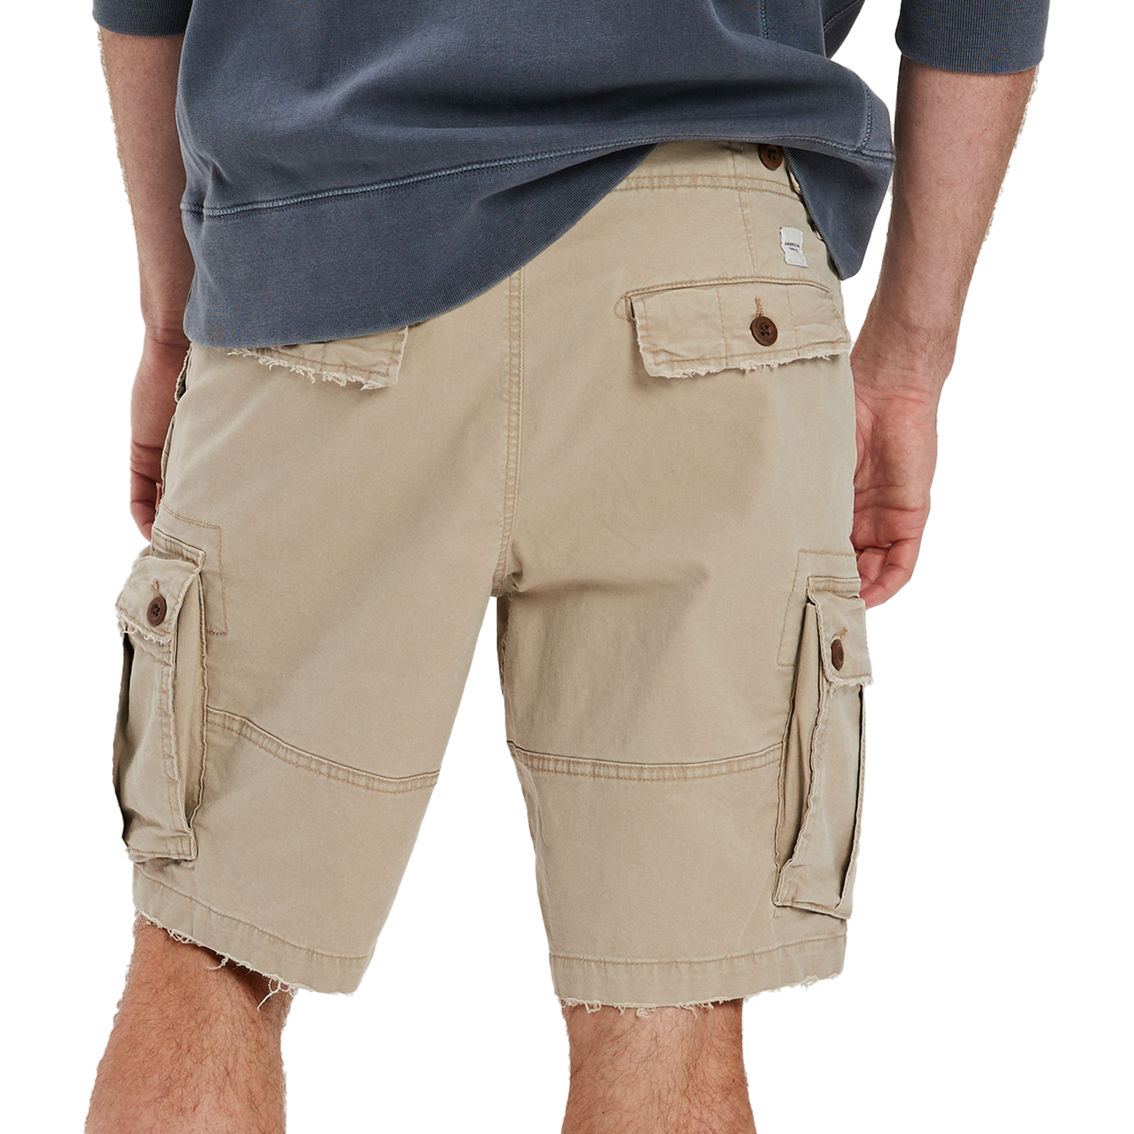 American Eagle Flex 10 in. Lived-In Cargo Shorts - Image 2 of 5